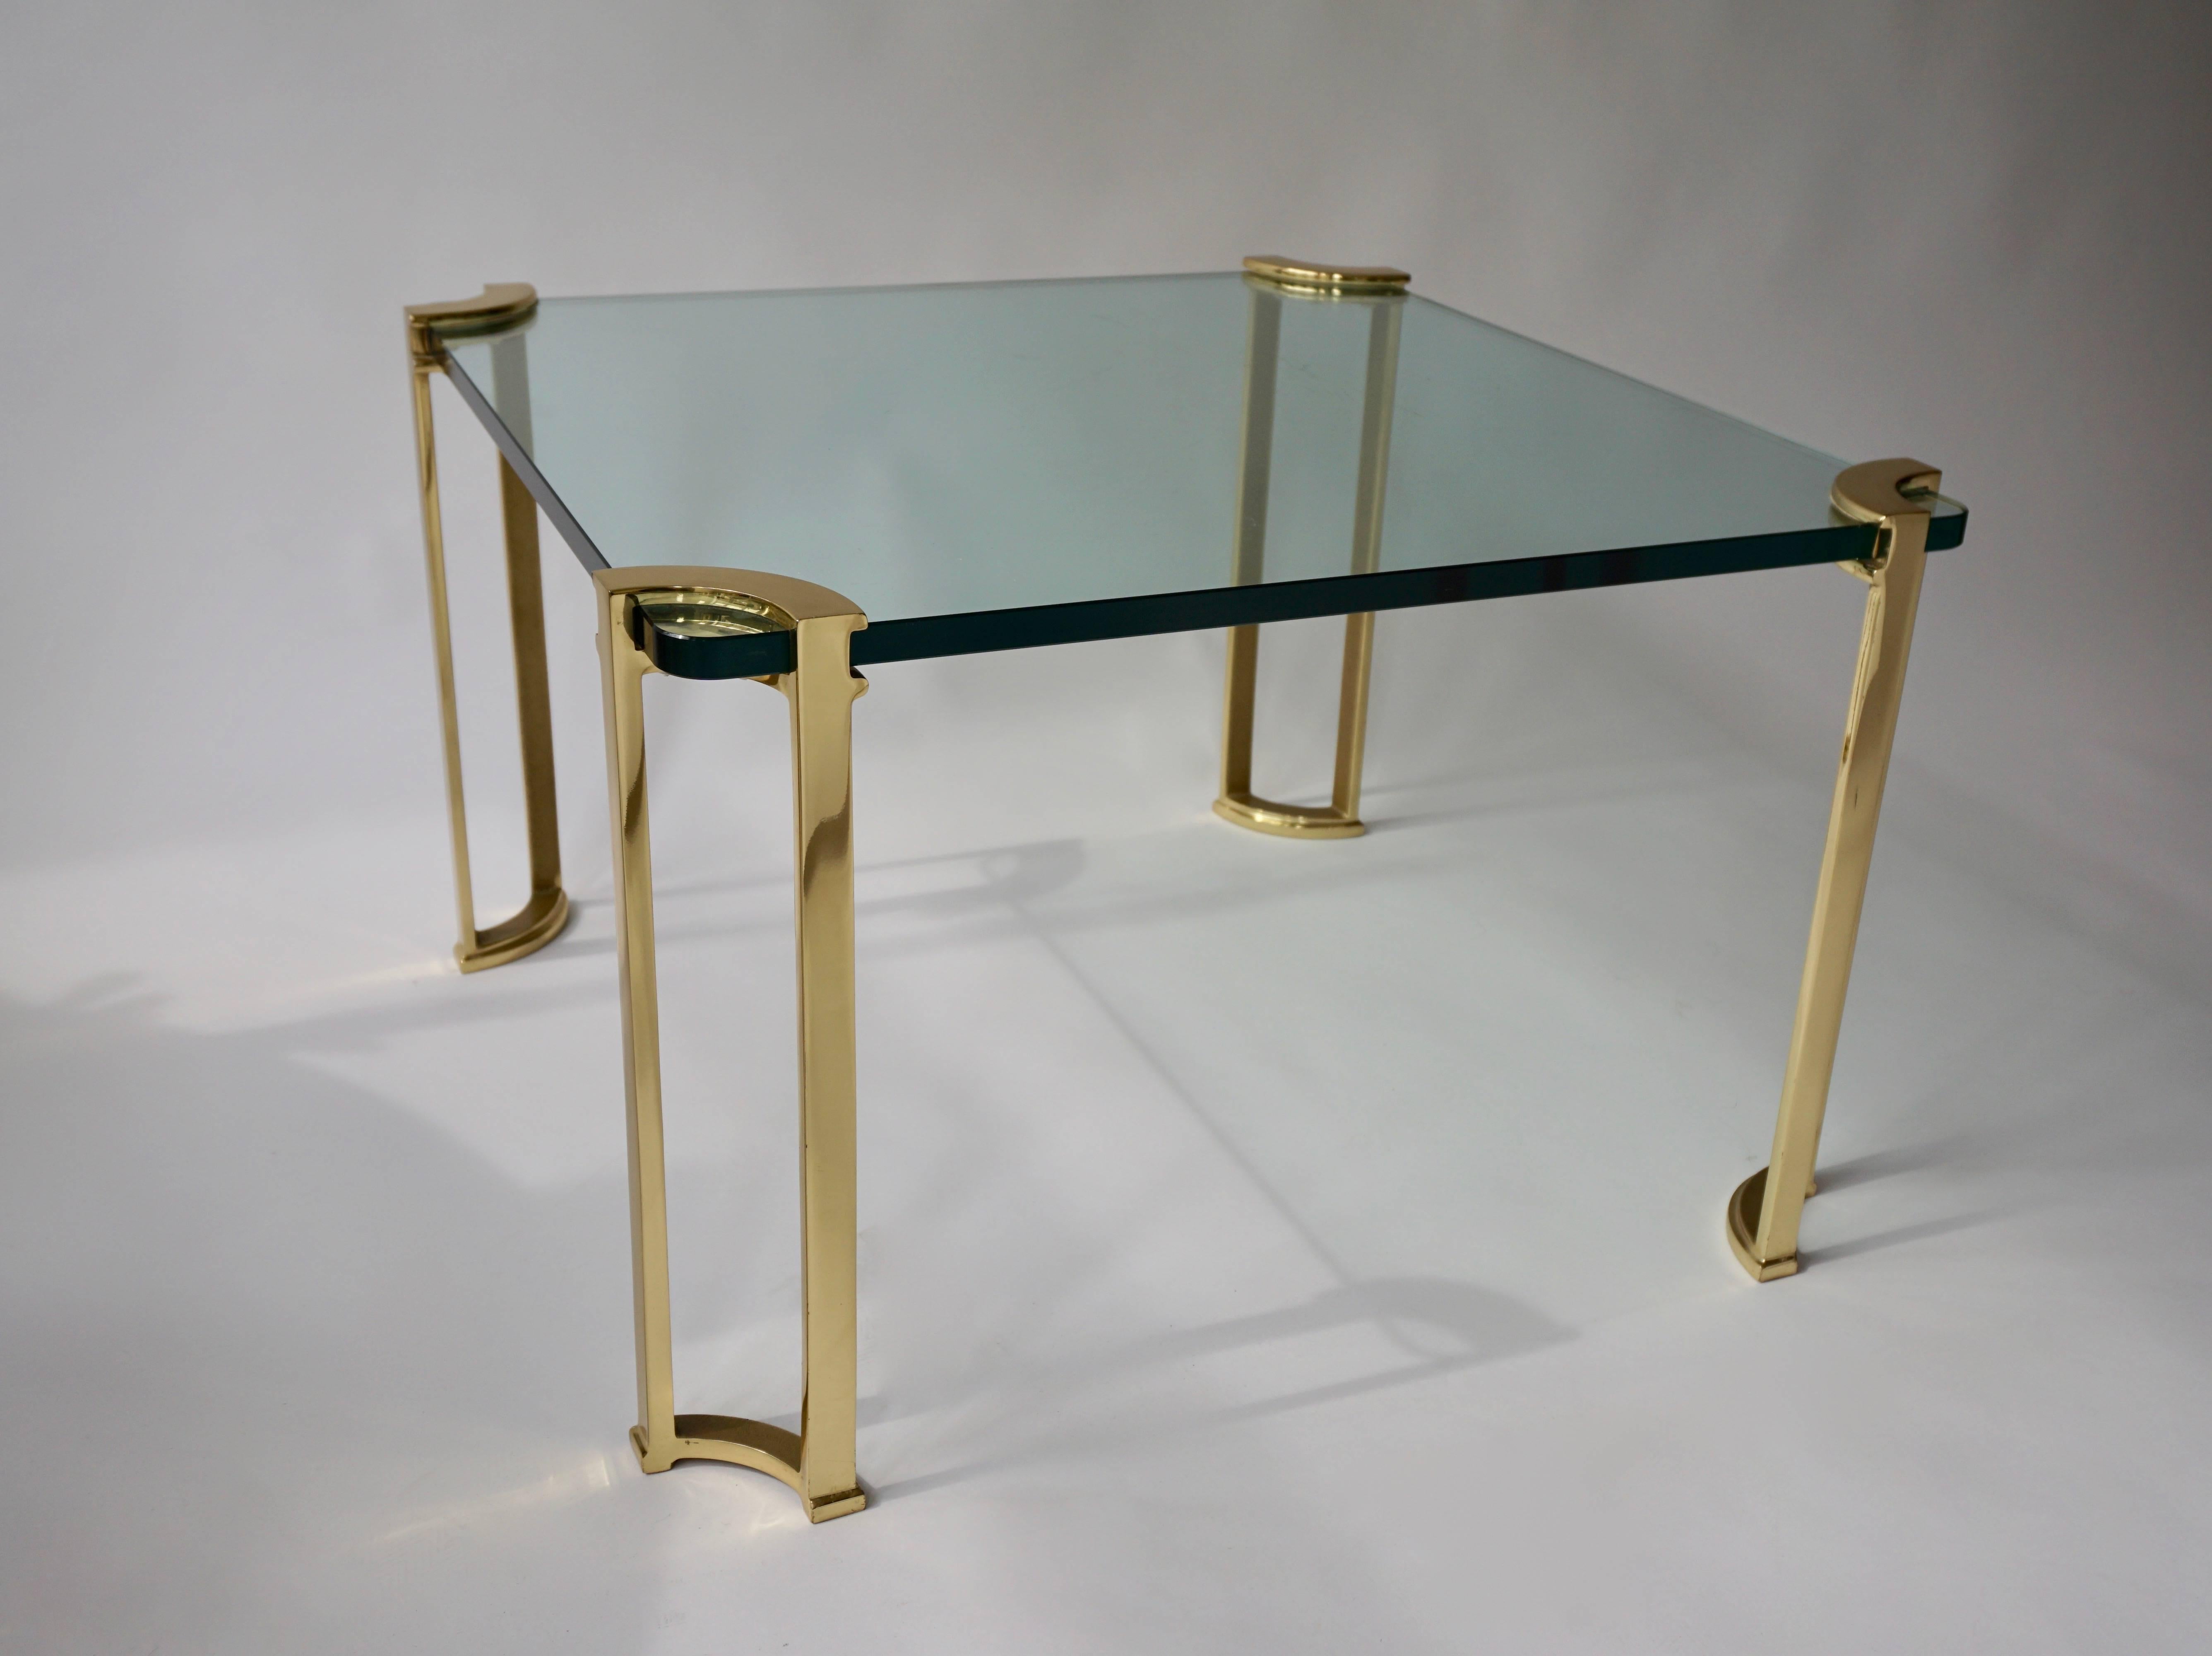 Bronze and glass coffee table.
Measures: Height 47 cm.
width 73 cm, depth 73 cm.